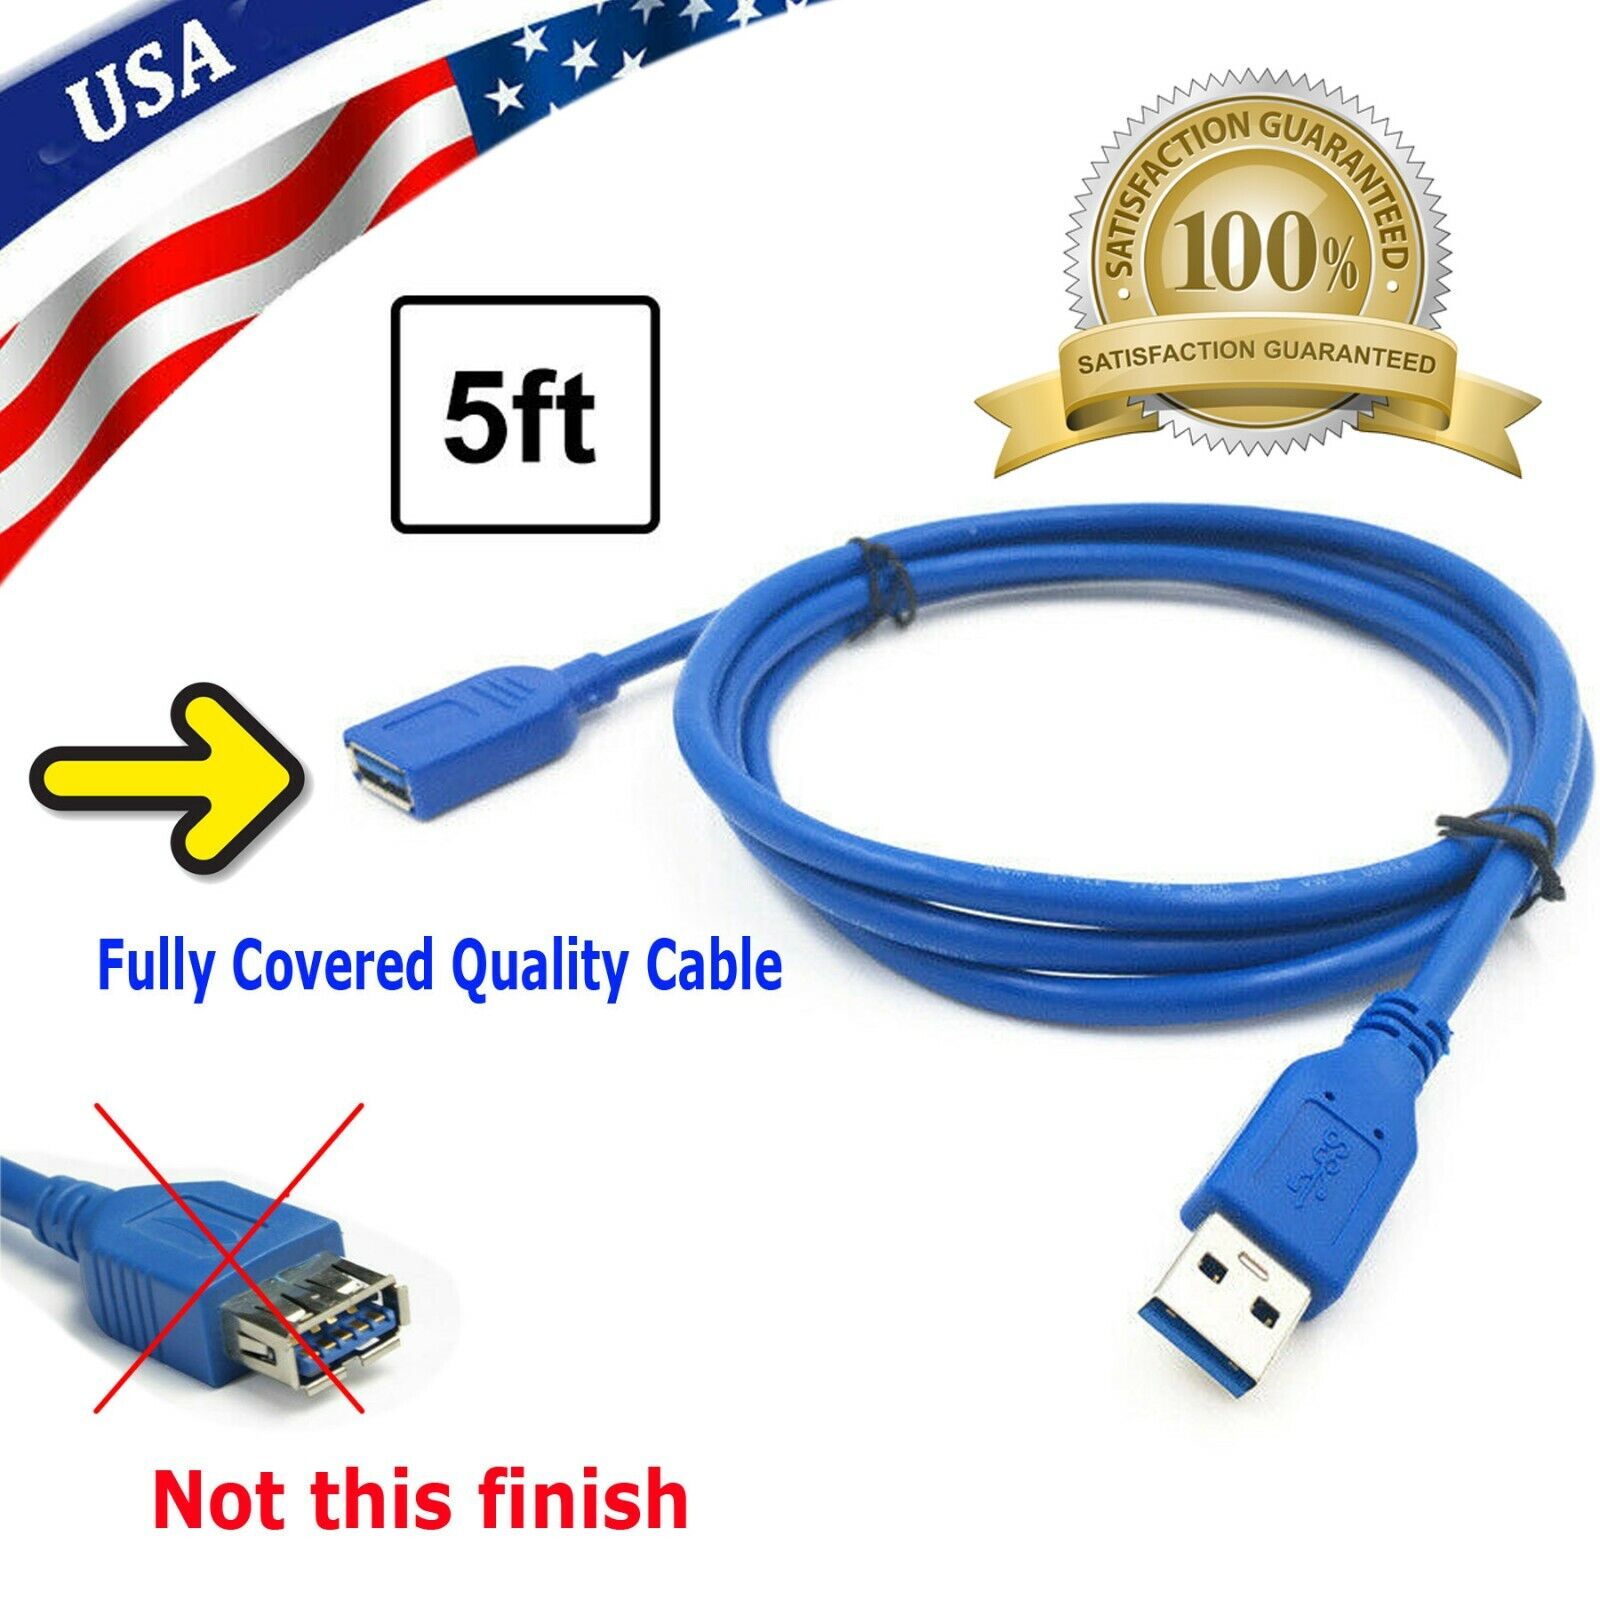 5FT 5 Feet USB 3.0 Type A Male to Female Extension Cable 1.5M Blue